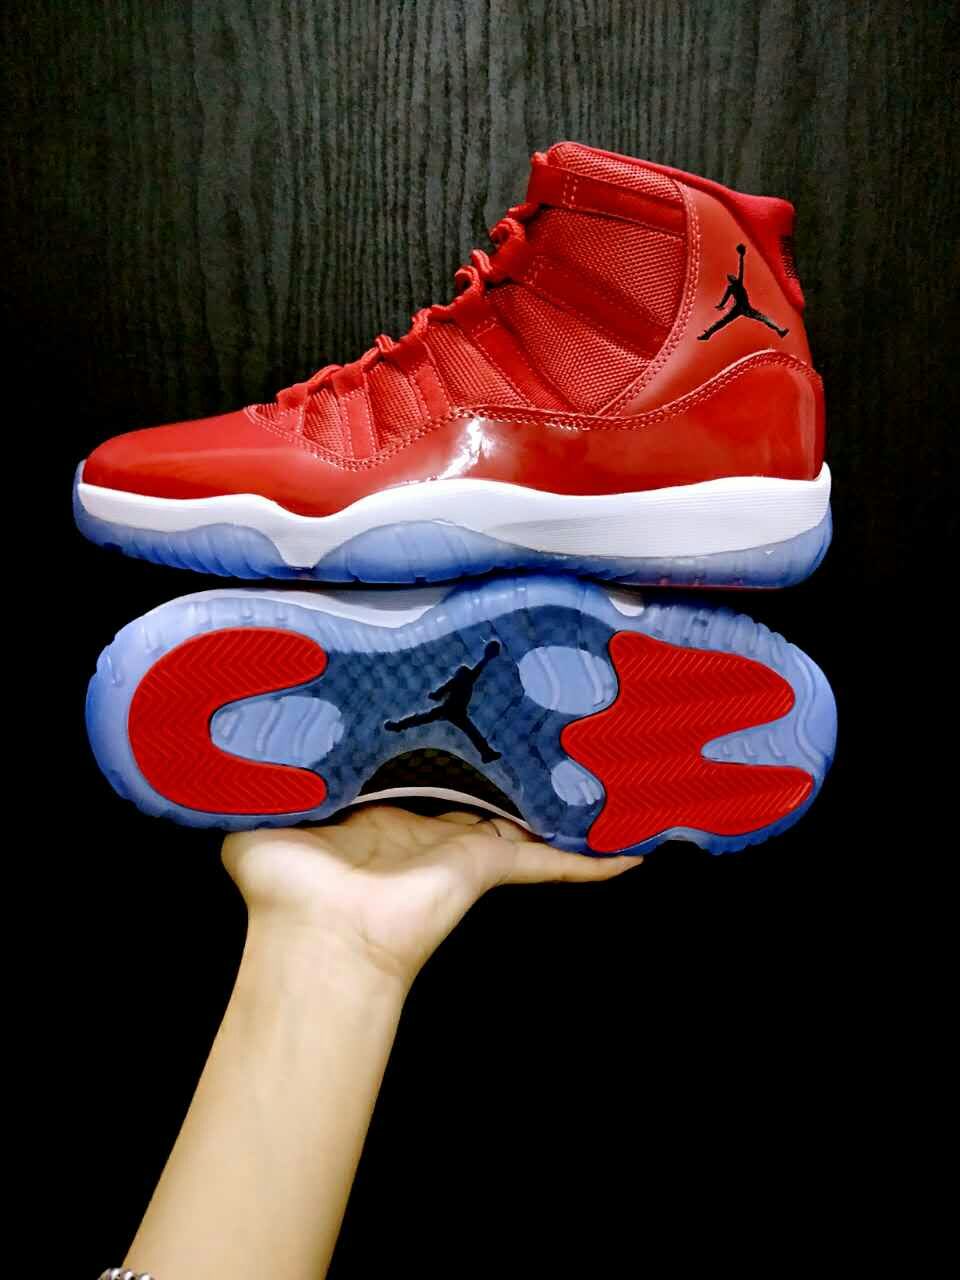 2017 Jordan 11 All Red Ice Sole Shoes 